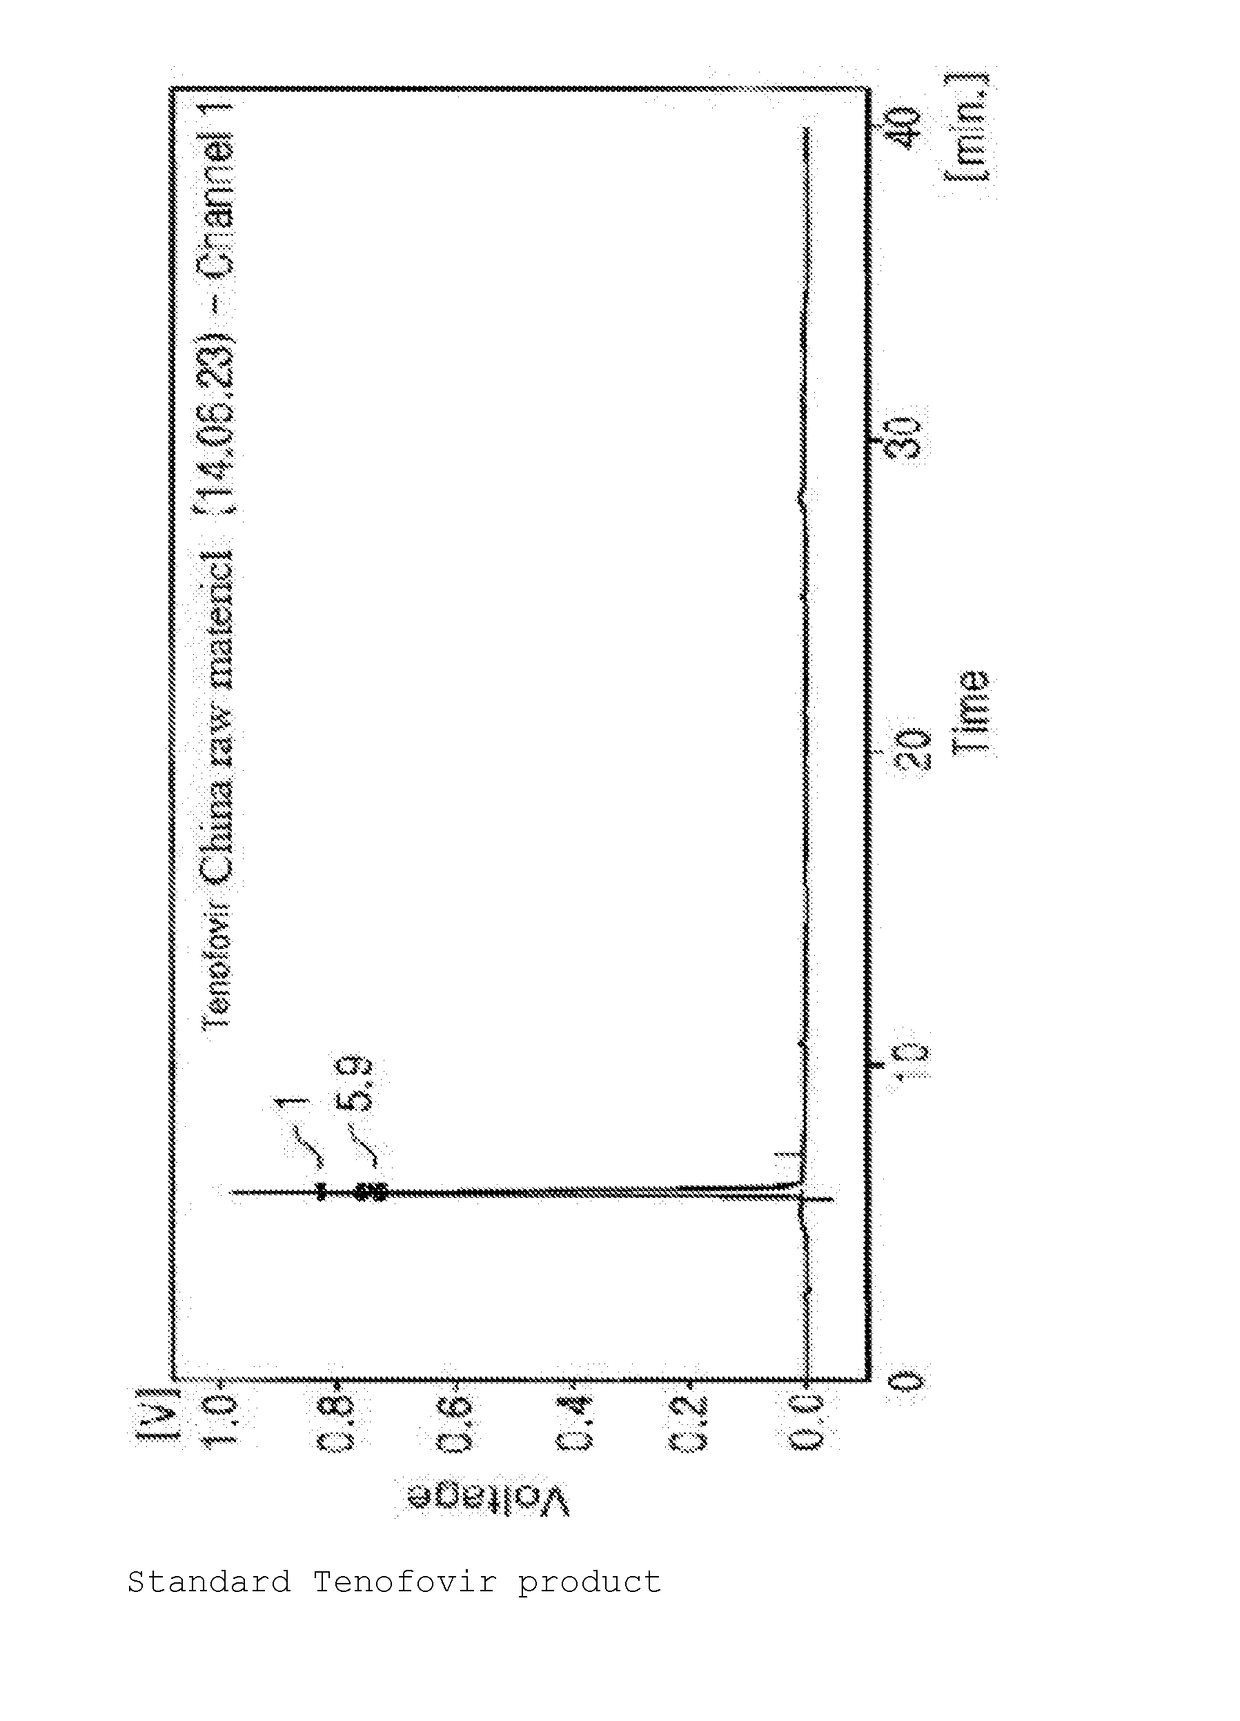 Synthesis Method For Improved Tenofovir Disoproxil Fumarate Using Ion-Exchange Resin And Method For Preparing Oral Dissolving Film Form Using The Same